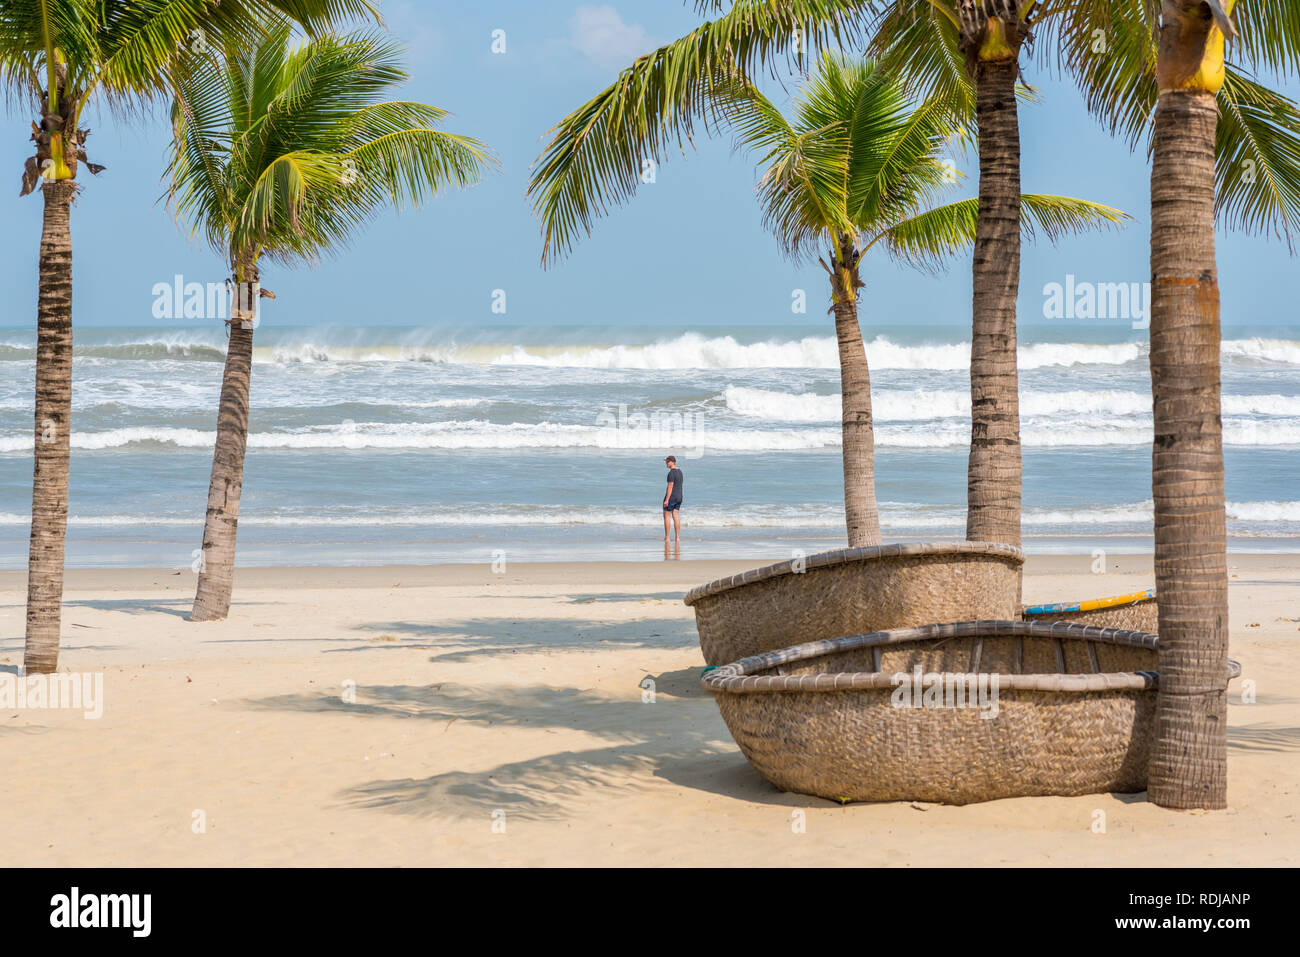 My Khe beach with a figure of a young traveler, traditional Vietnamese coracles (round wicker boats) lying on the sand, palm trees and coming waves. Stock Photo